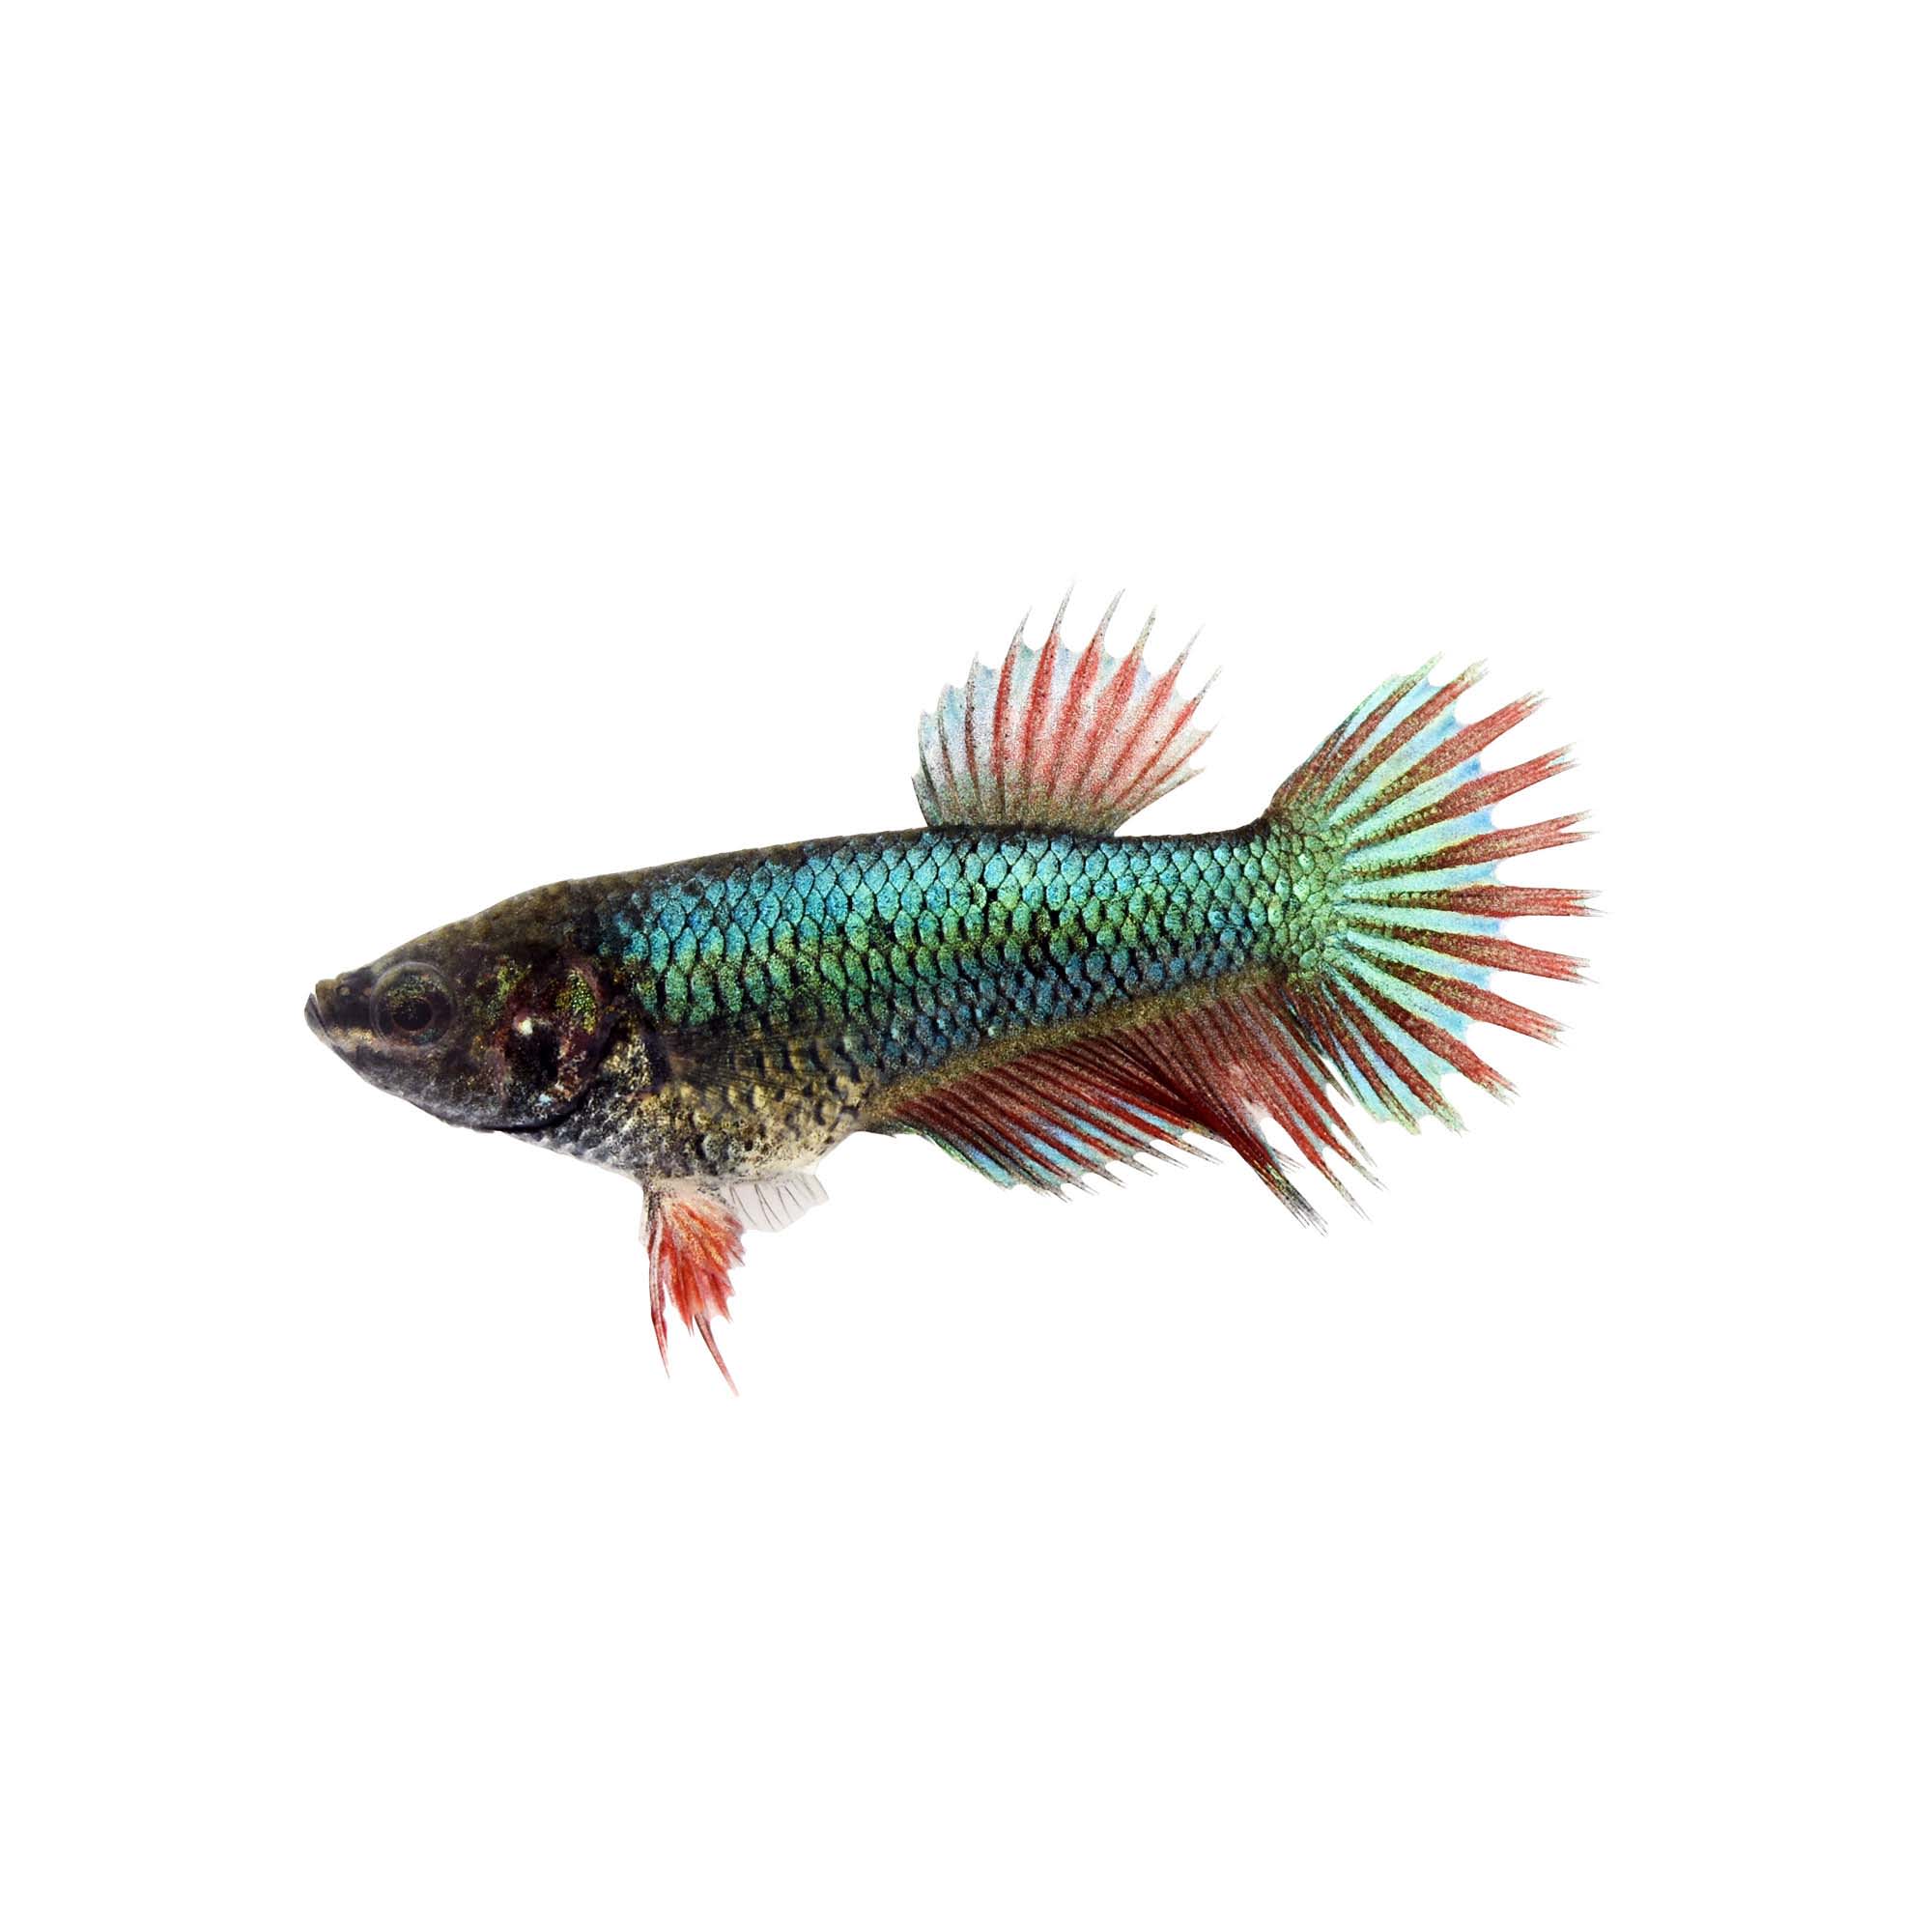 crowntail betta for sale